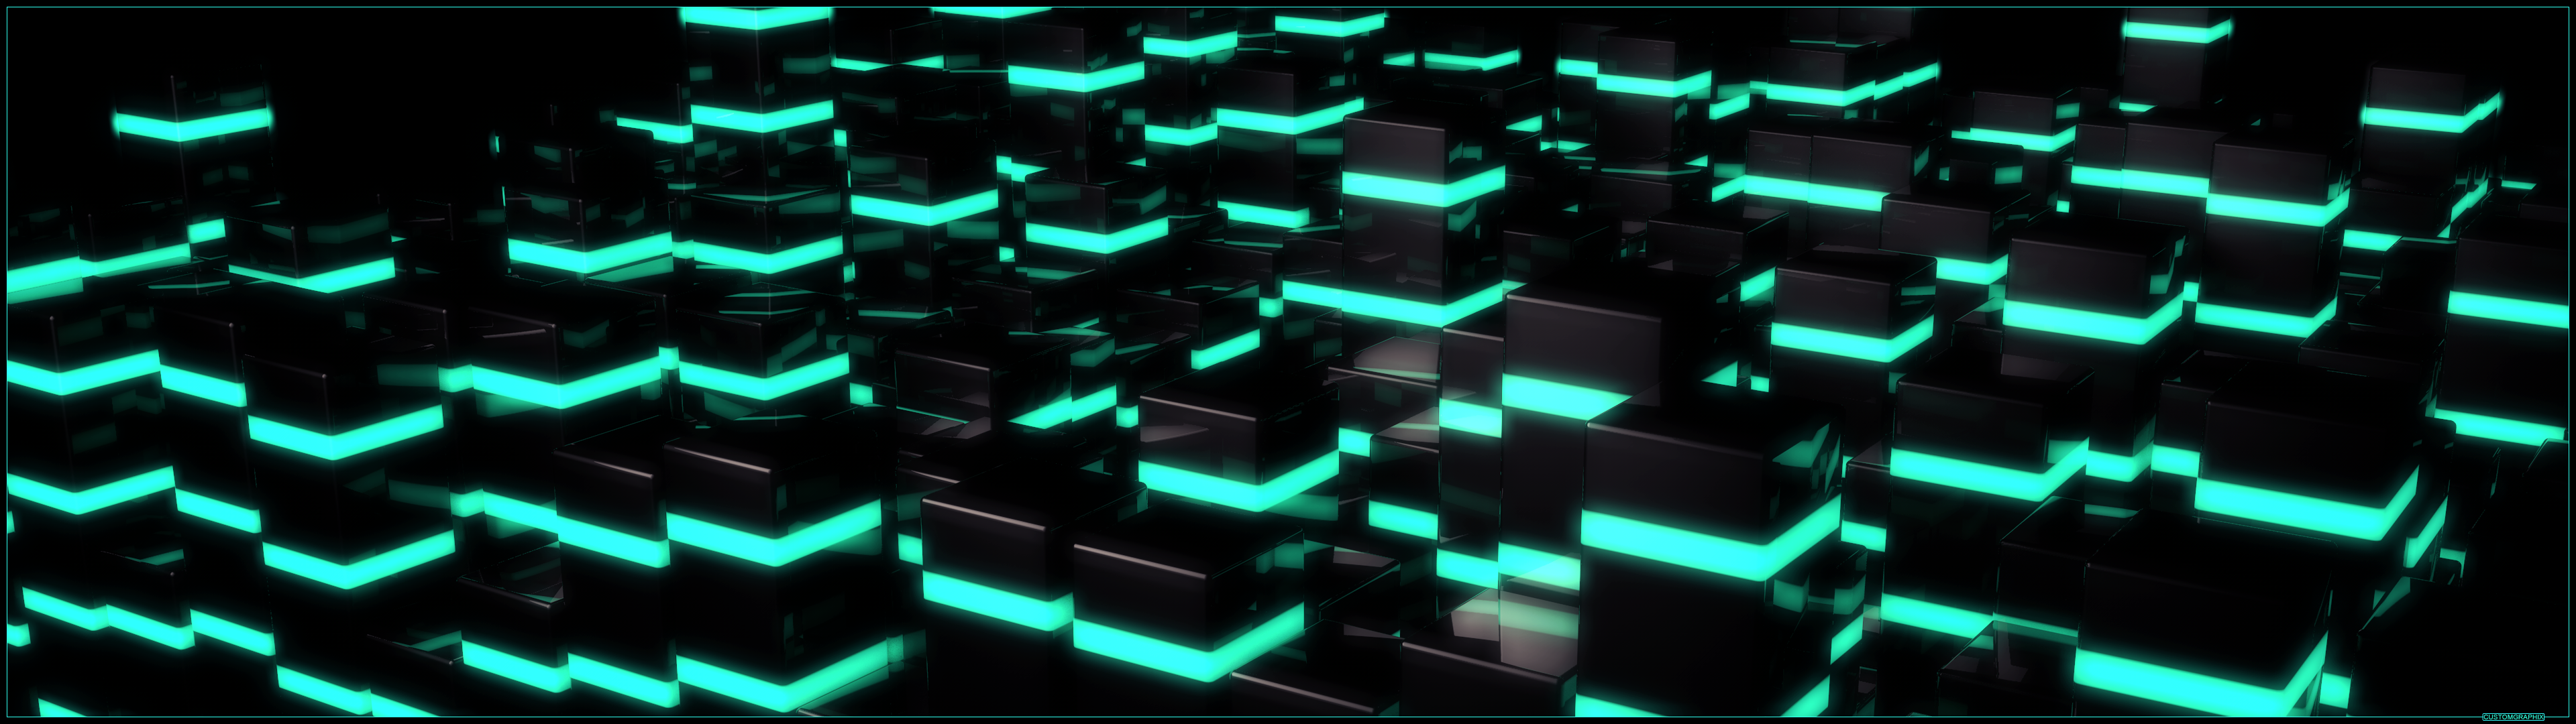 Abstract C4D Dualscreen wallpaper 3840x1080 by xCustomGraphix on